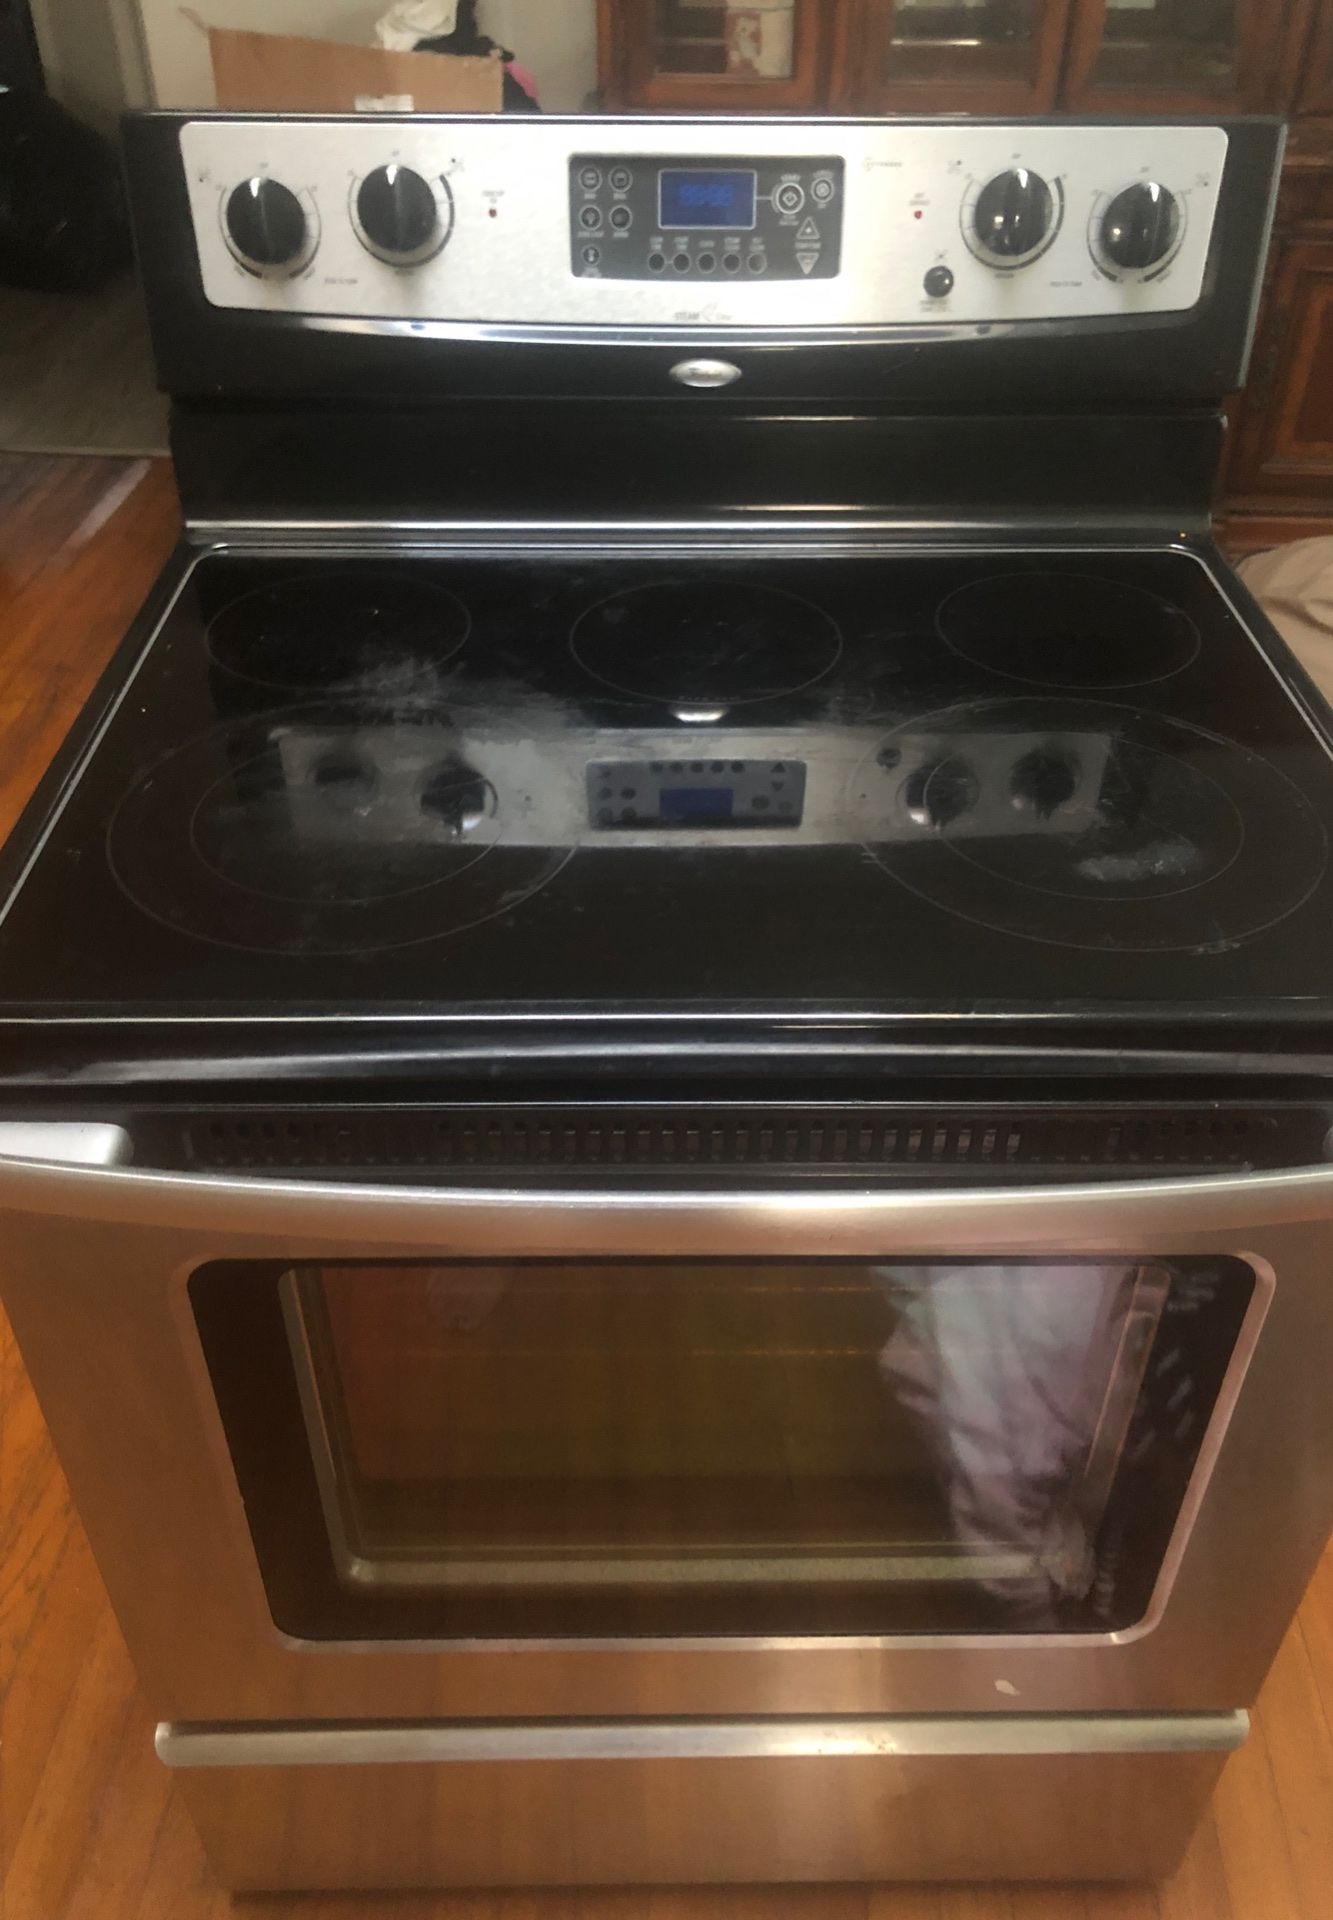 Whirlpool Stainless steel electric stove with automatic steam clean